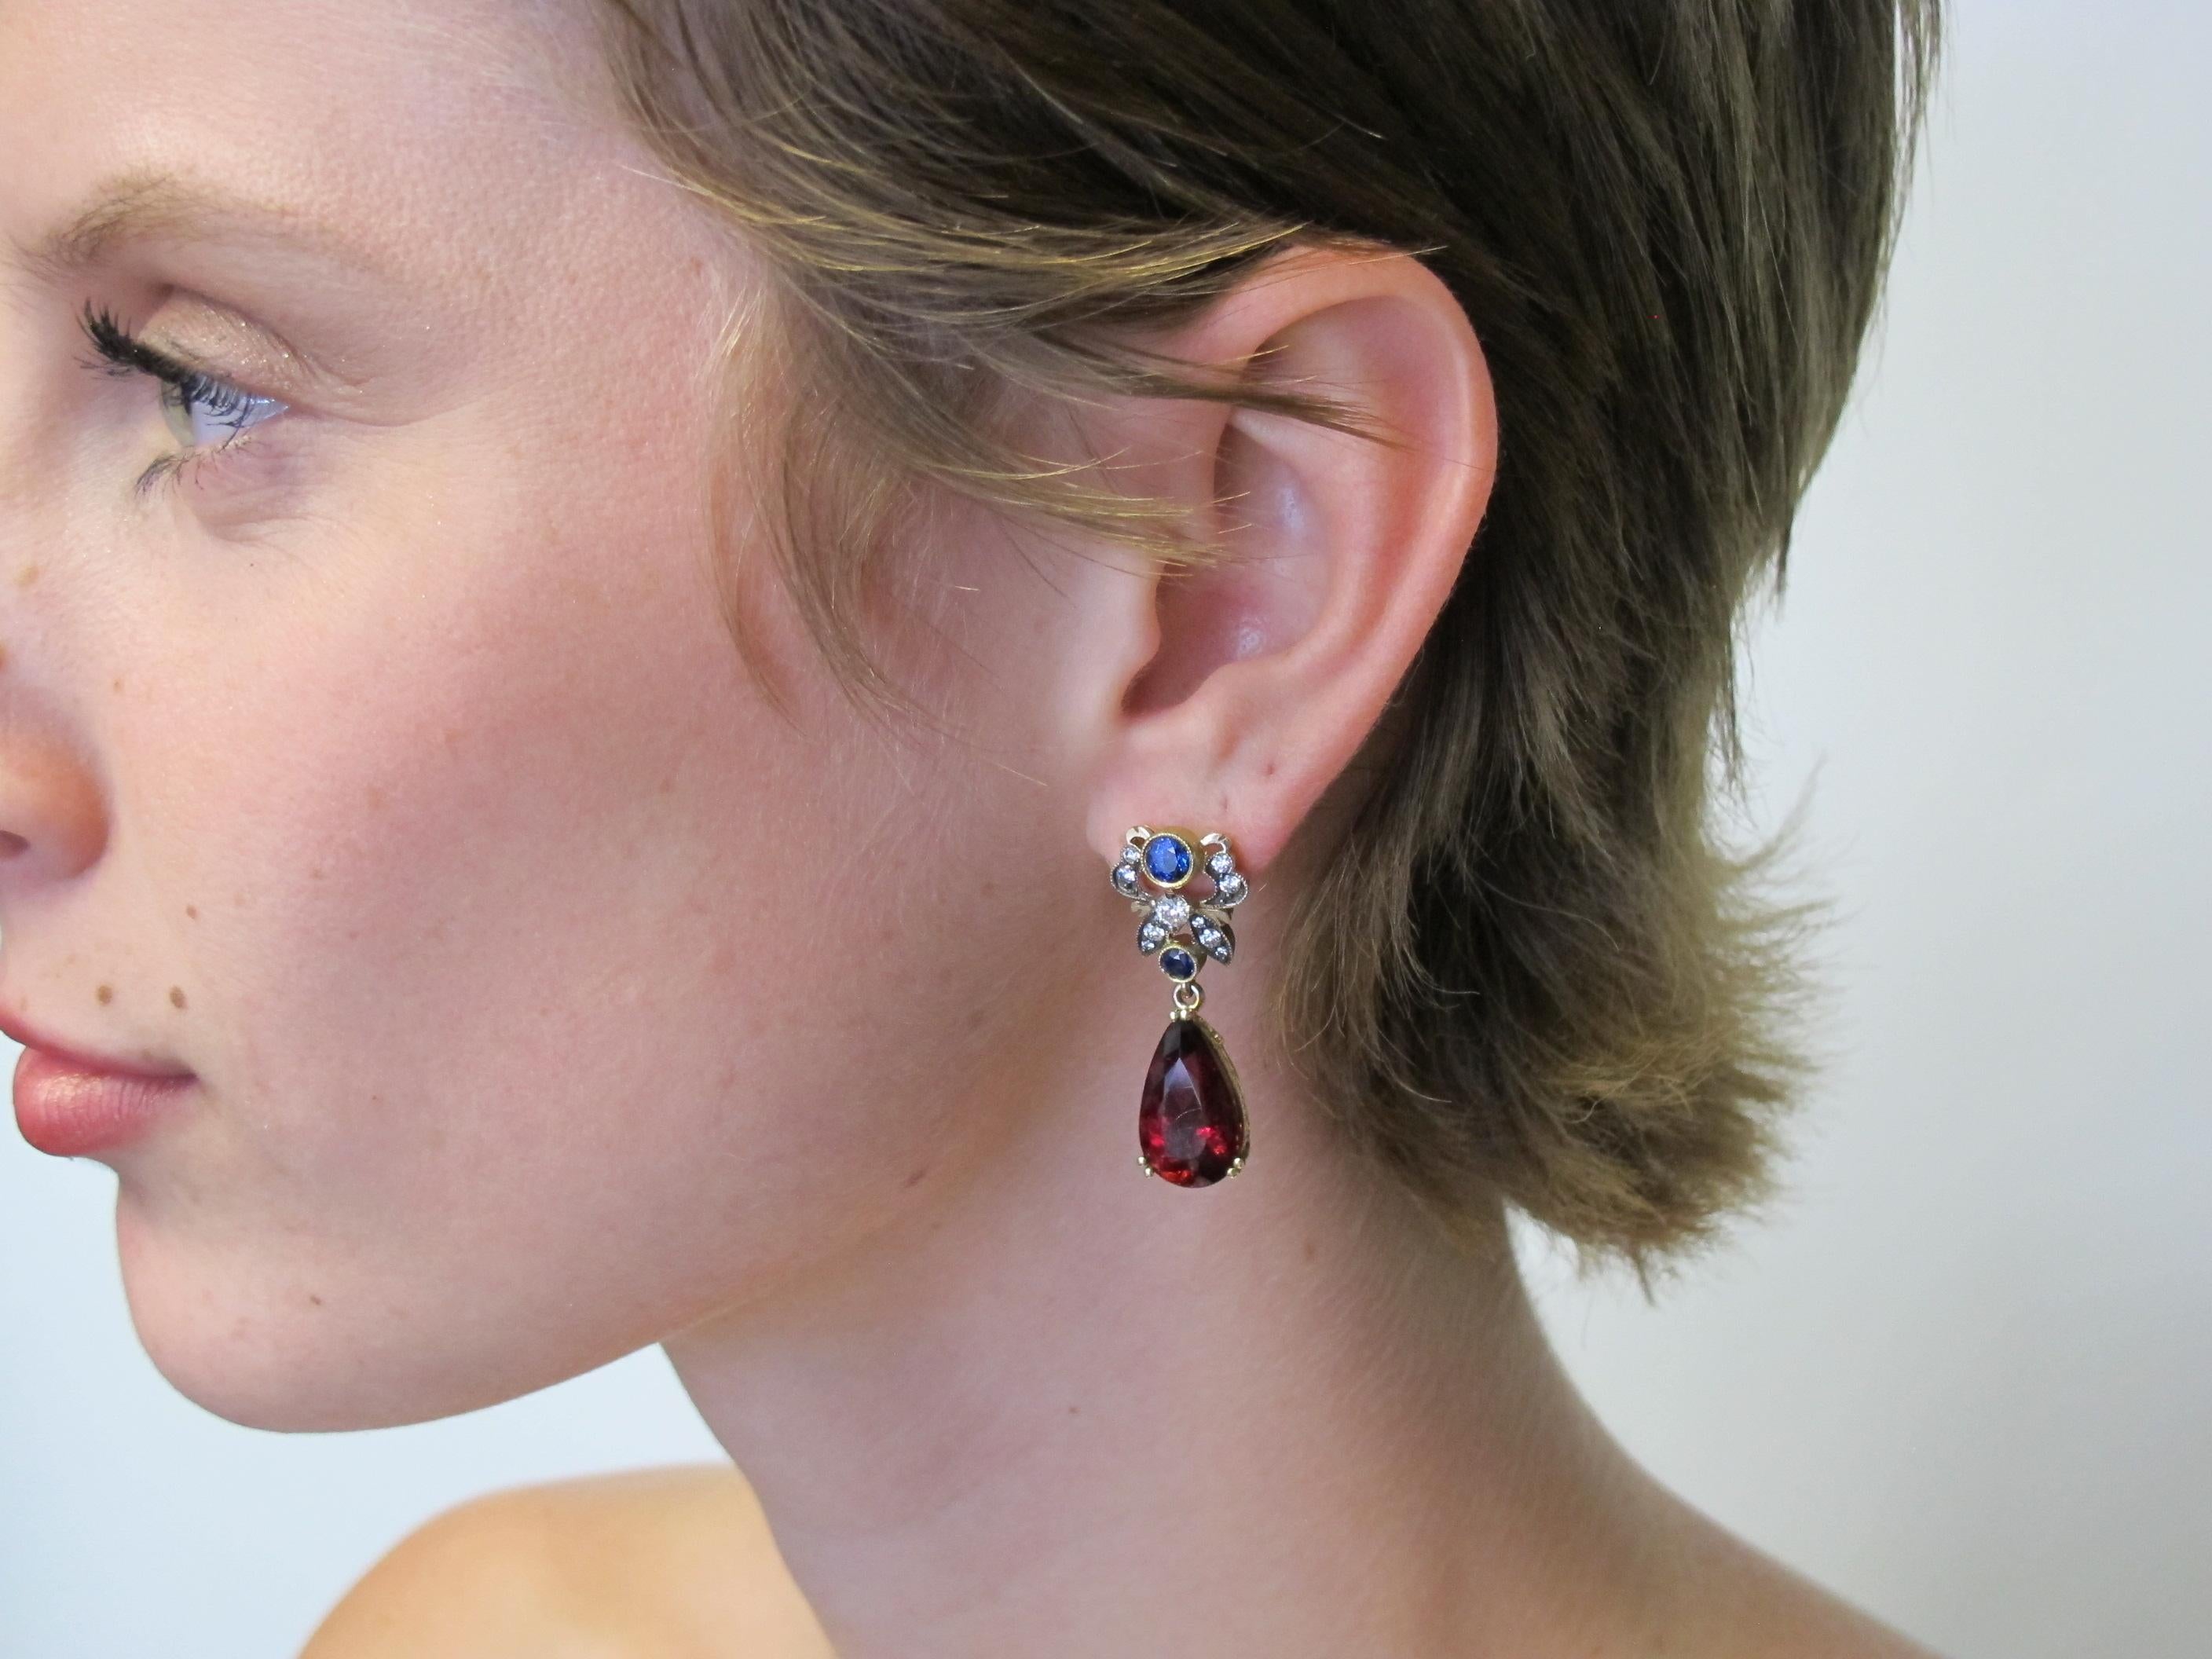 These butterfly inspired earrings feature rubellite tourmalines (16.34x9.64mm/11.70cts tw), blue sapphires (1.25cts tw), and white diamonds (0.60cts tw) set in a custom 18k white and yellow gold, hand engraved mounting. It is very unusual to see